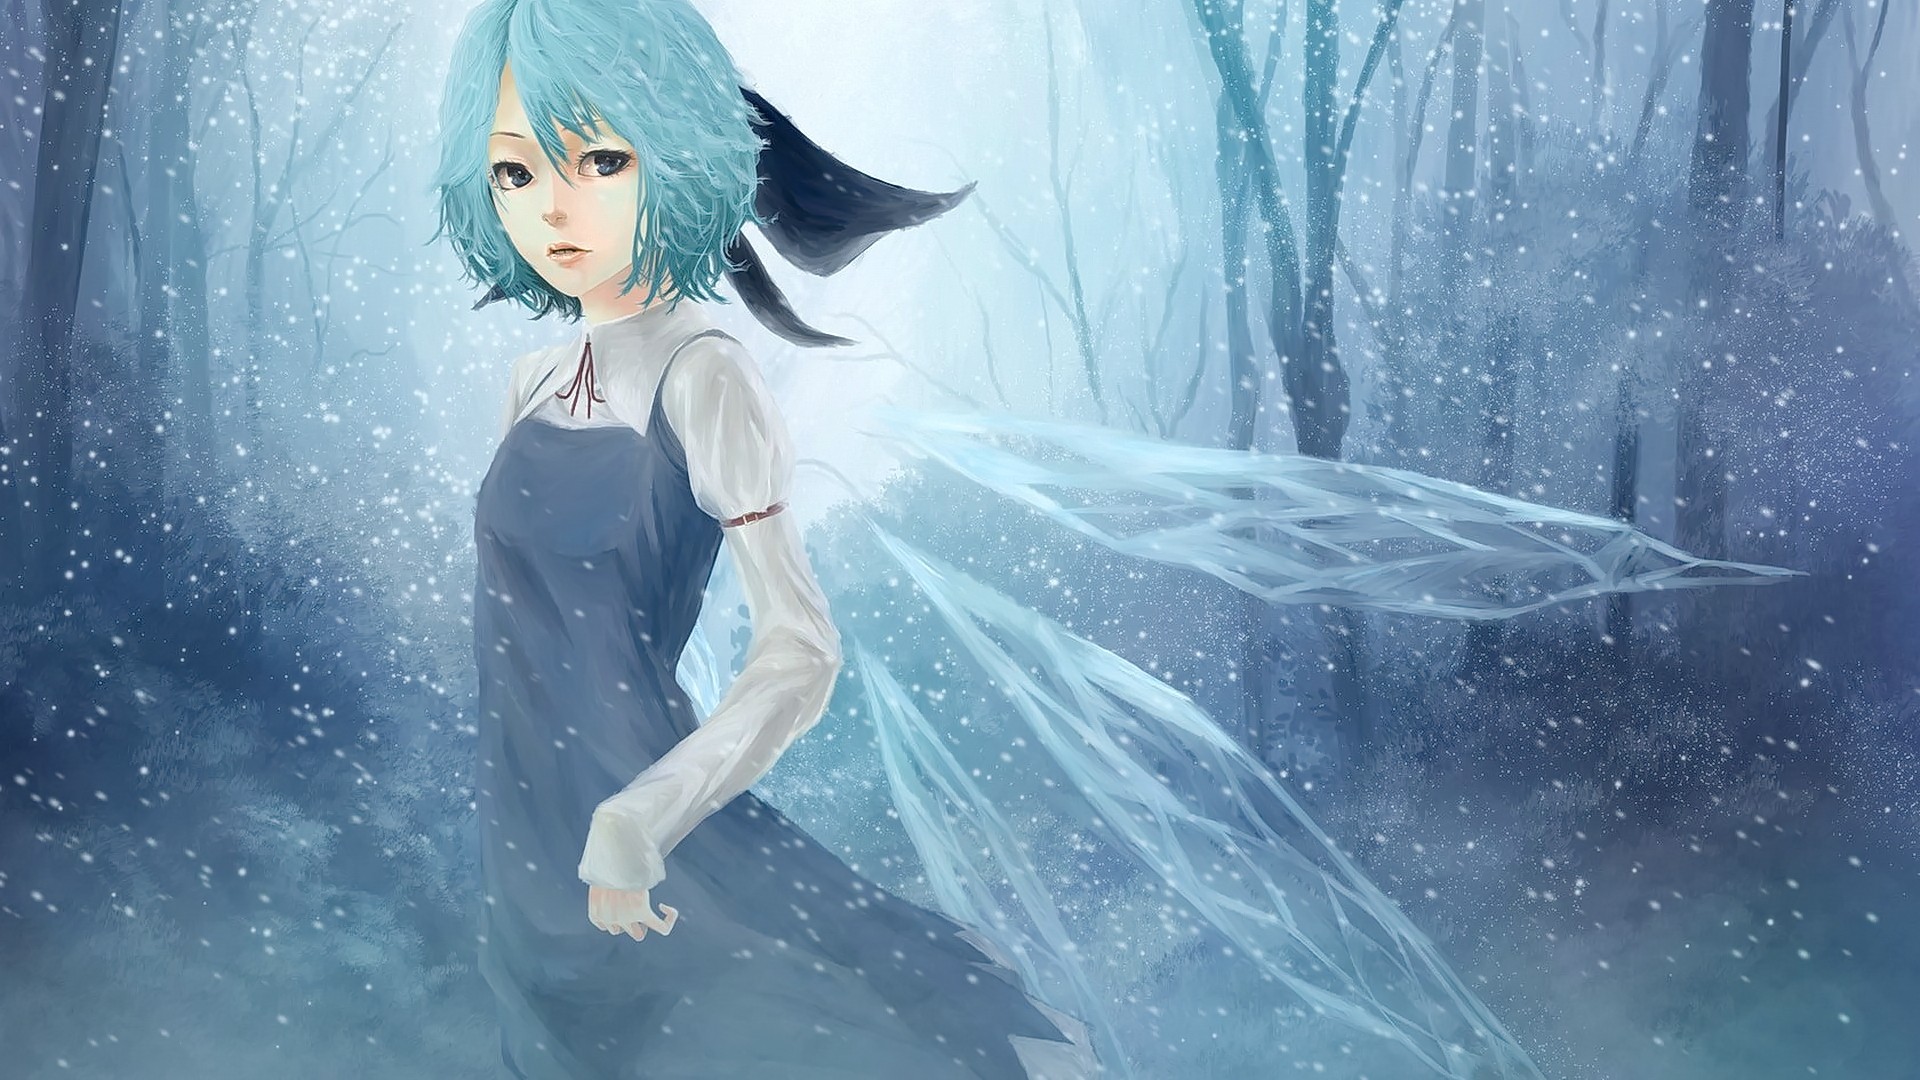 Anime 1920x1080 anime anime girls cyan hair green eyes looking at viewer wings forest Touhou Cirno snow winter shoulder length hair fantasy art fantasy girl loli